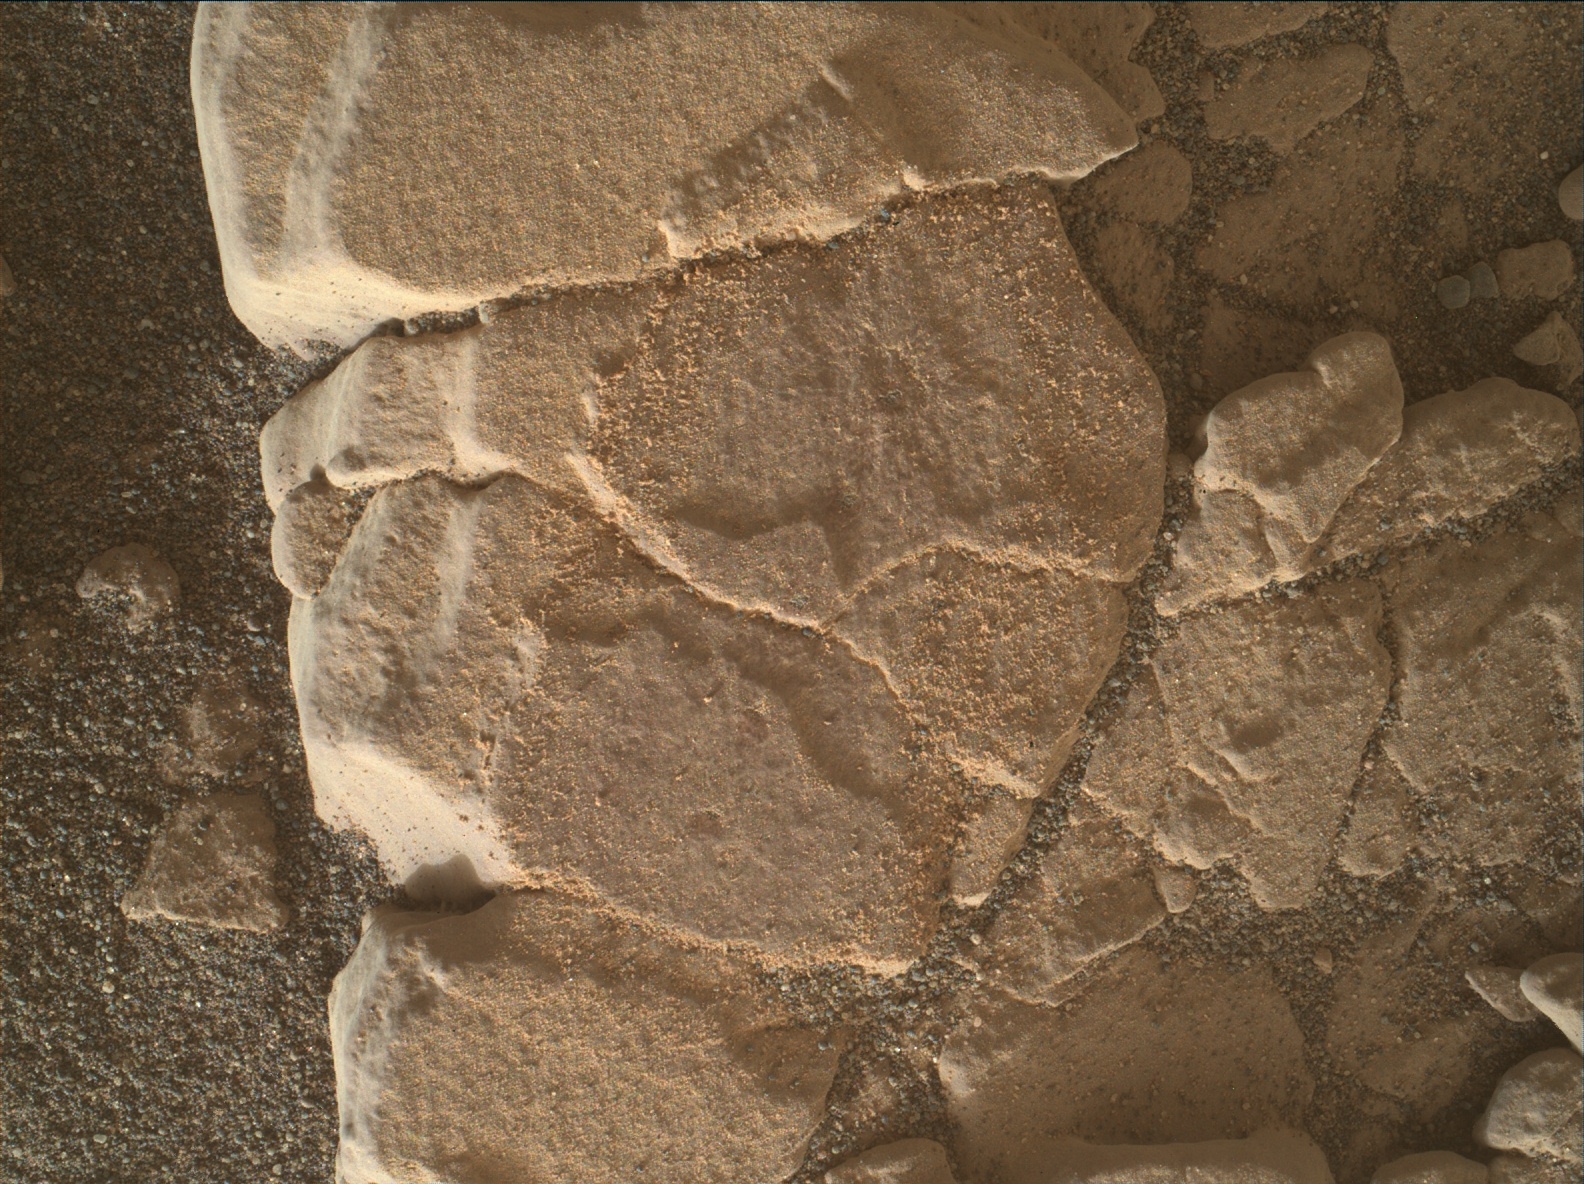 Nasa's Mars rover Curiosity acquired this image using its Mars Hand Lens Imager (MAHLI) on Sol 2466